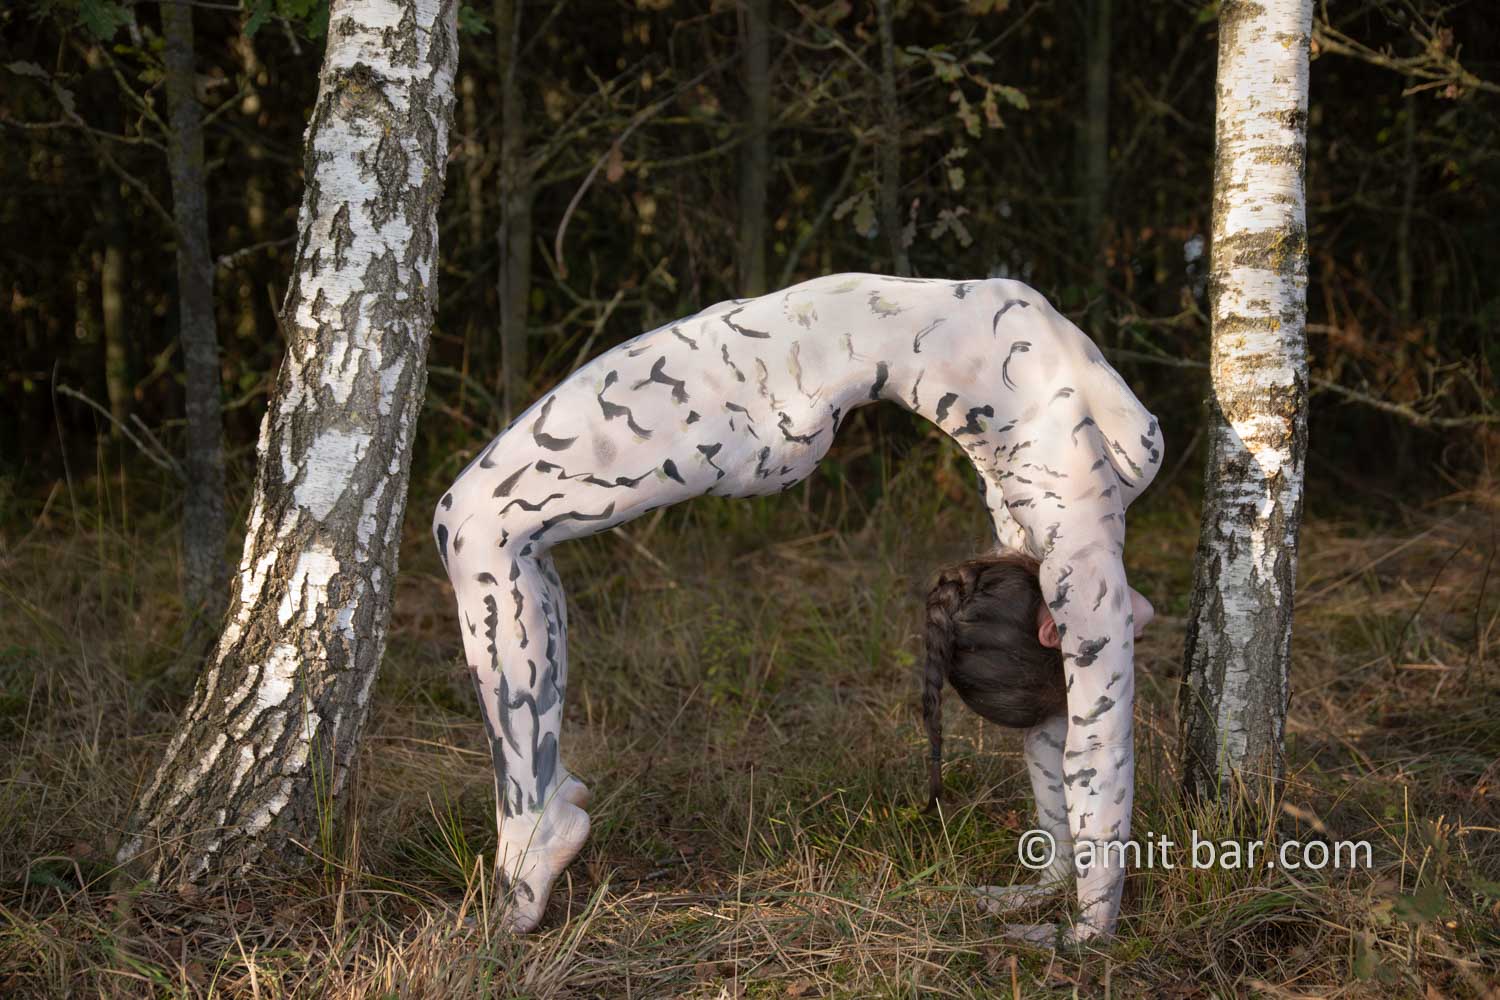 A body-painting model is making an arch between the white trunks of birch trees in De Achterhoek, The Netherlands